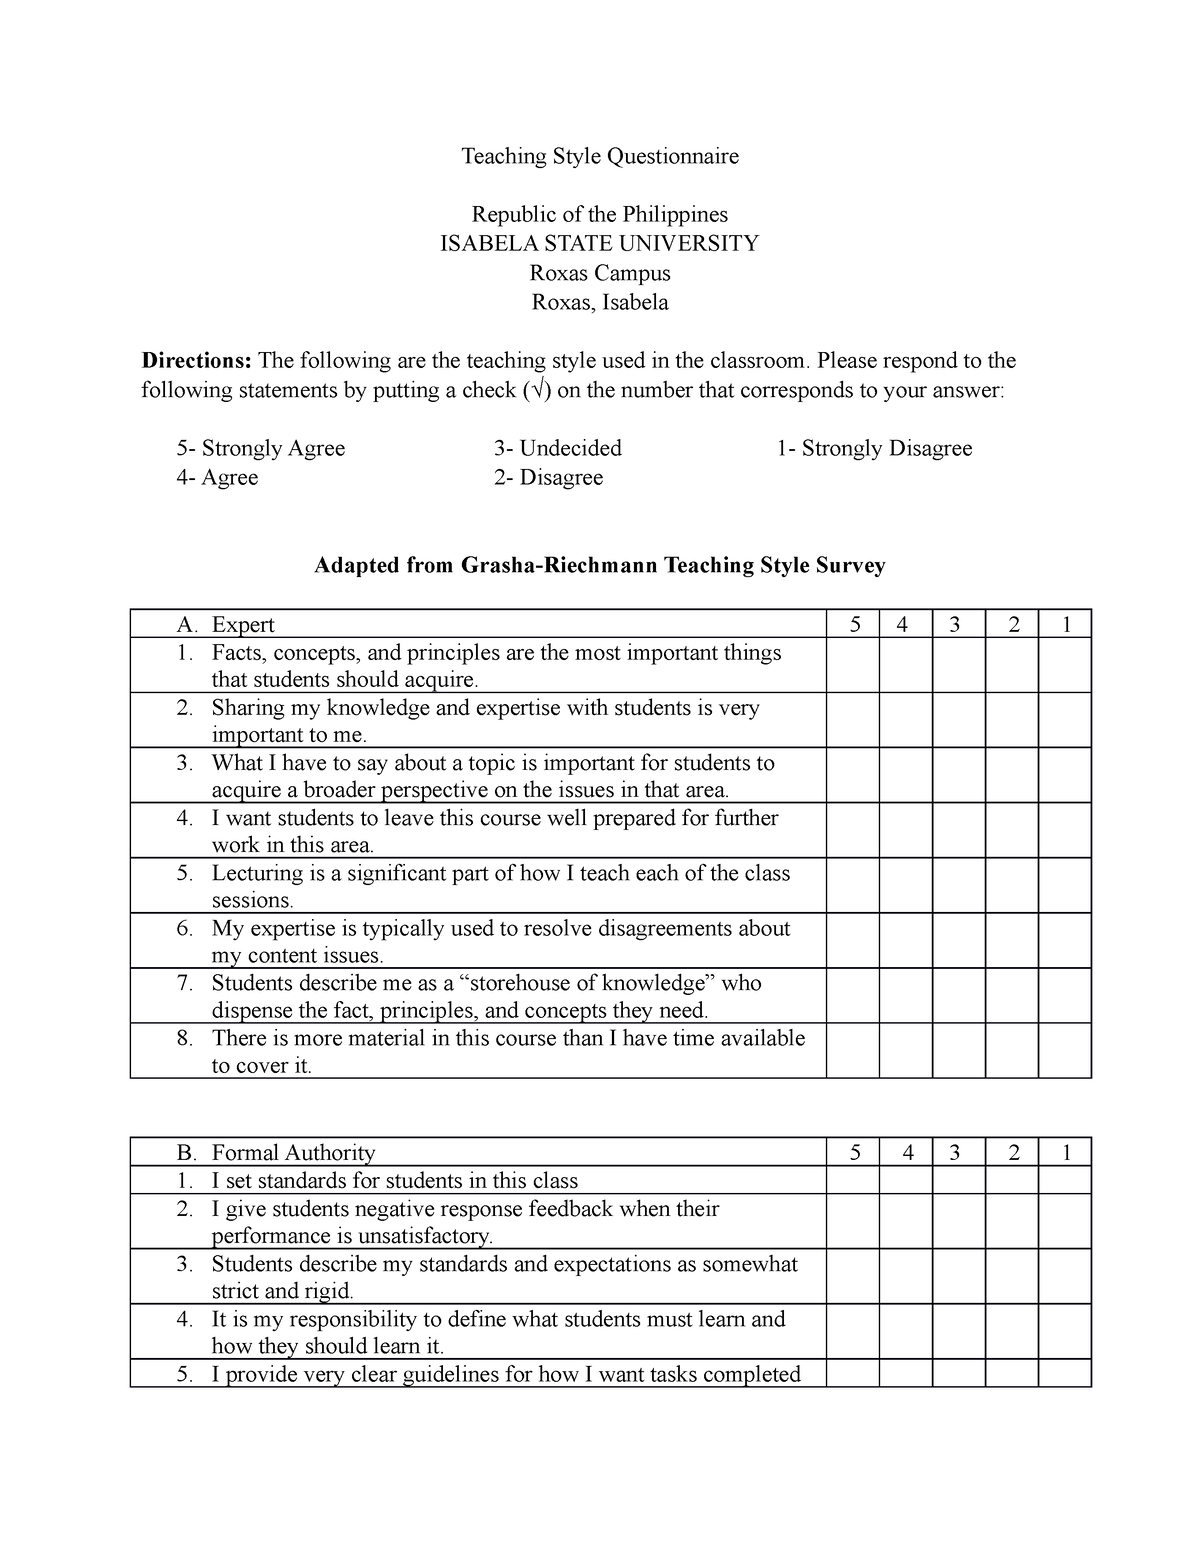 teaching-style-questionnaire-teaching-style-questionnaire-republic-of